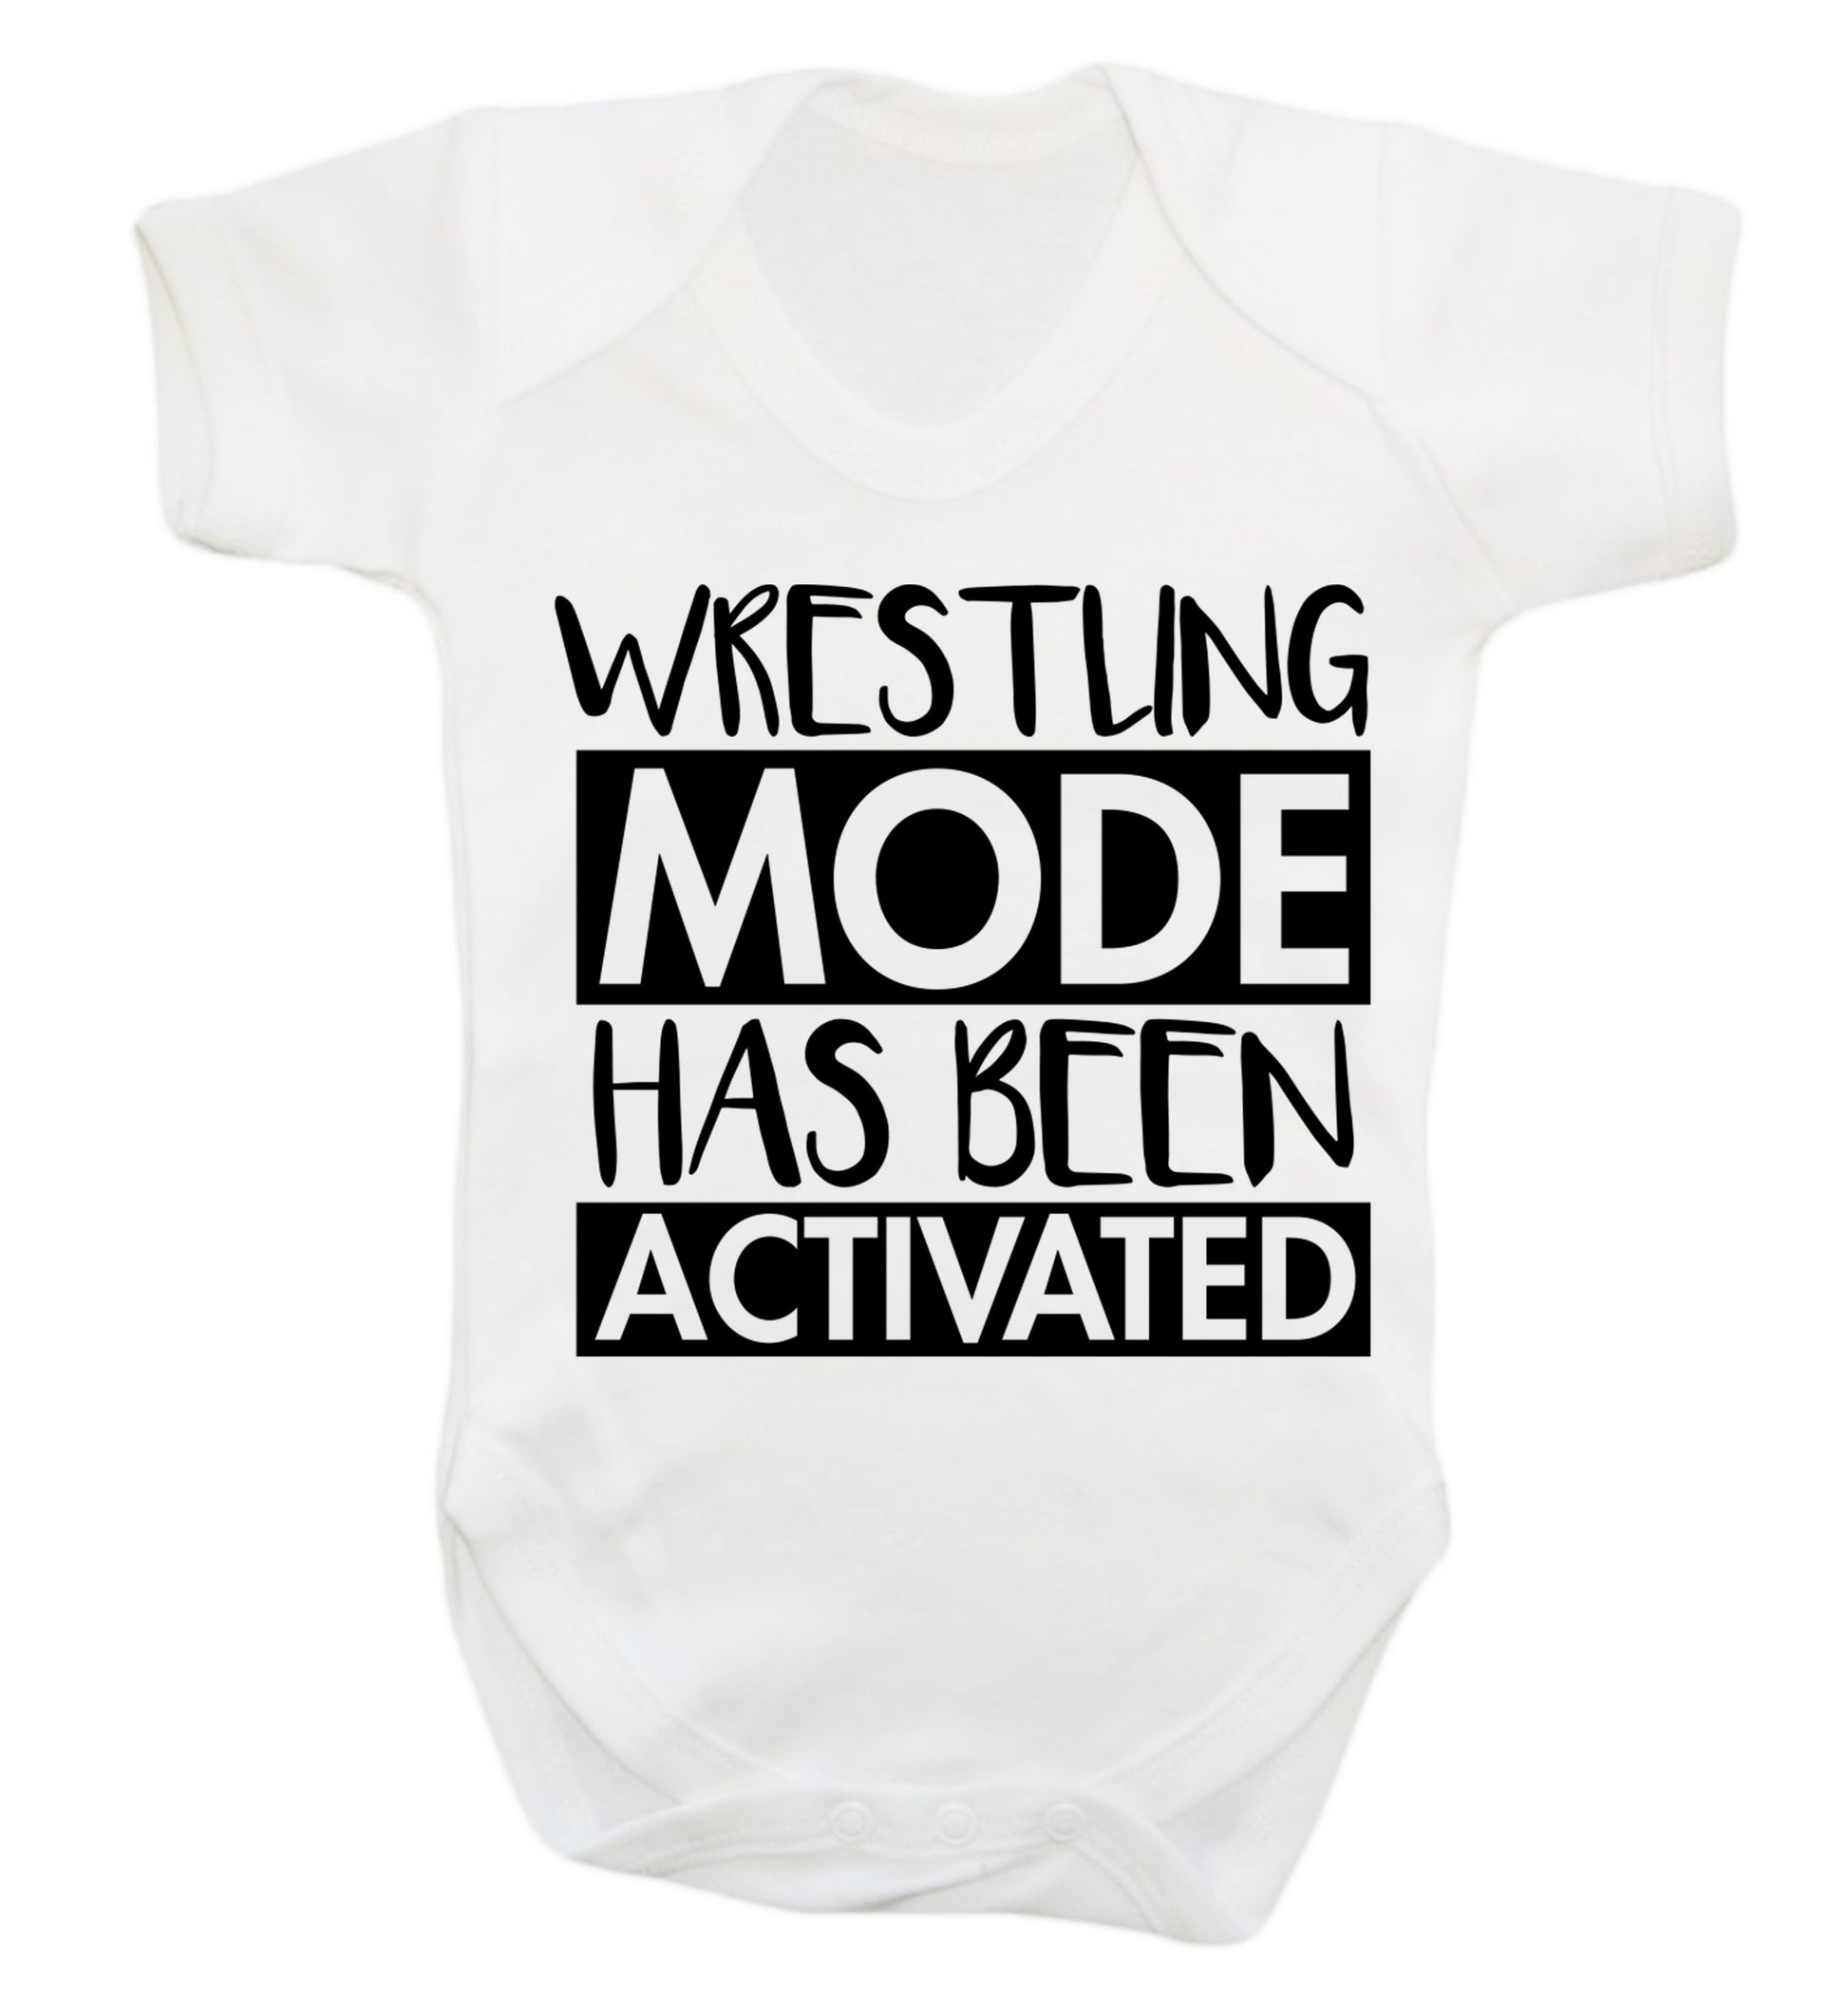 Wresting mode activated Baby Vest white 18-24 months